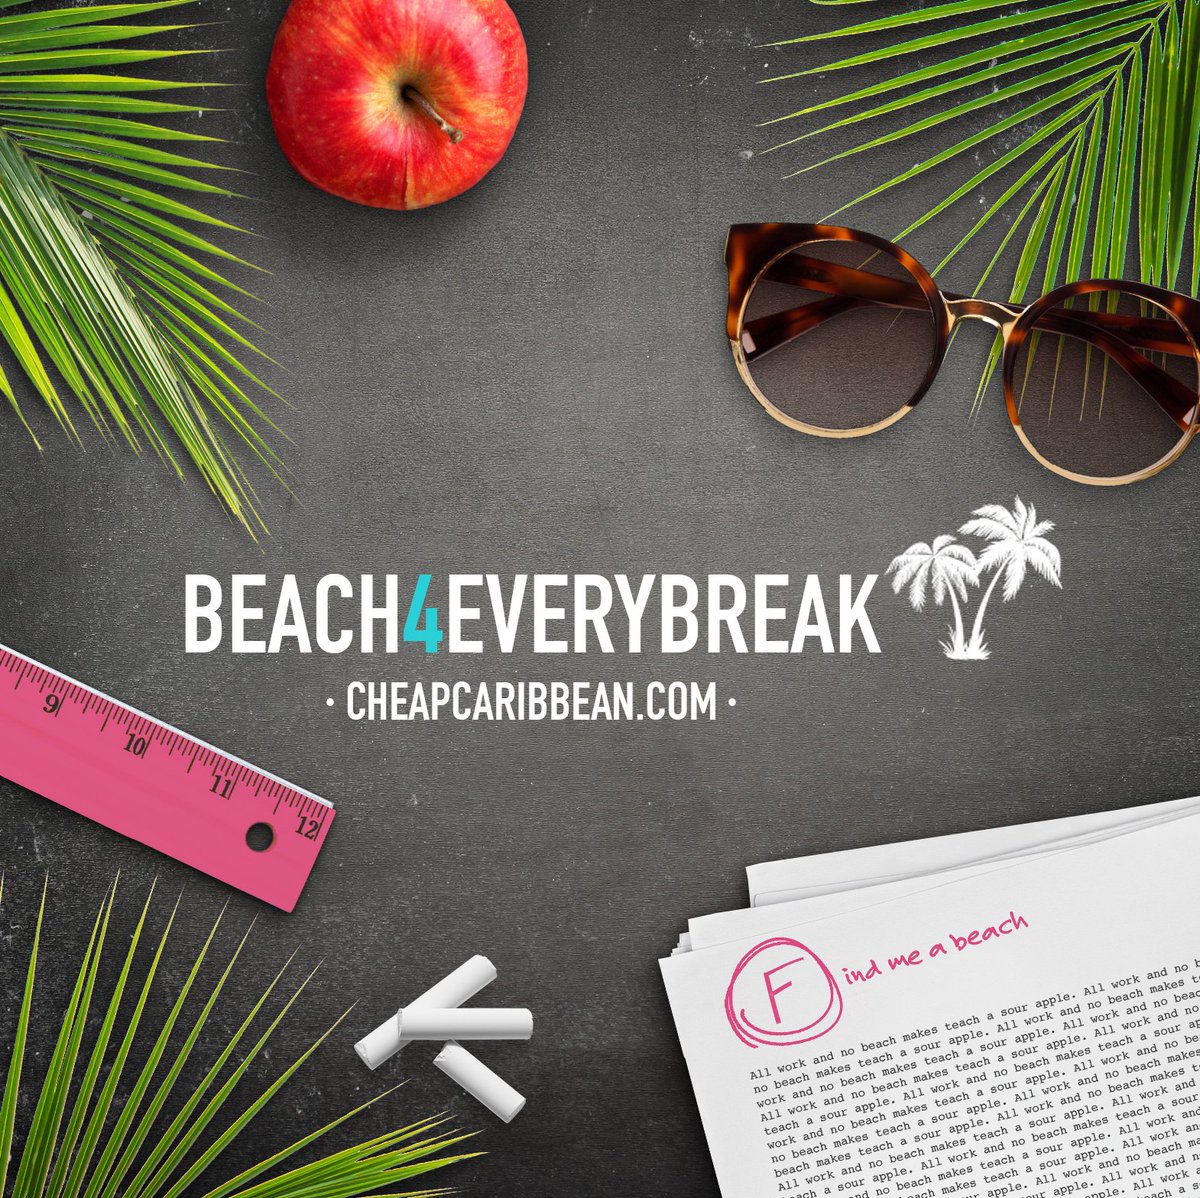 Only 8 days left to vote for the teacher that will win FOUR trips for the 2018-2019 school year. Vote now: ow.ly/BYn530lfJGH. #Beach4EveryBreak